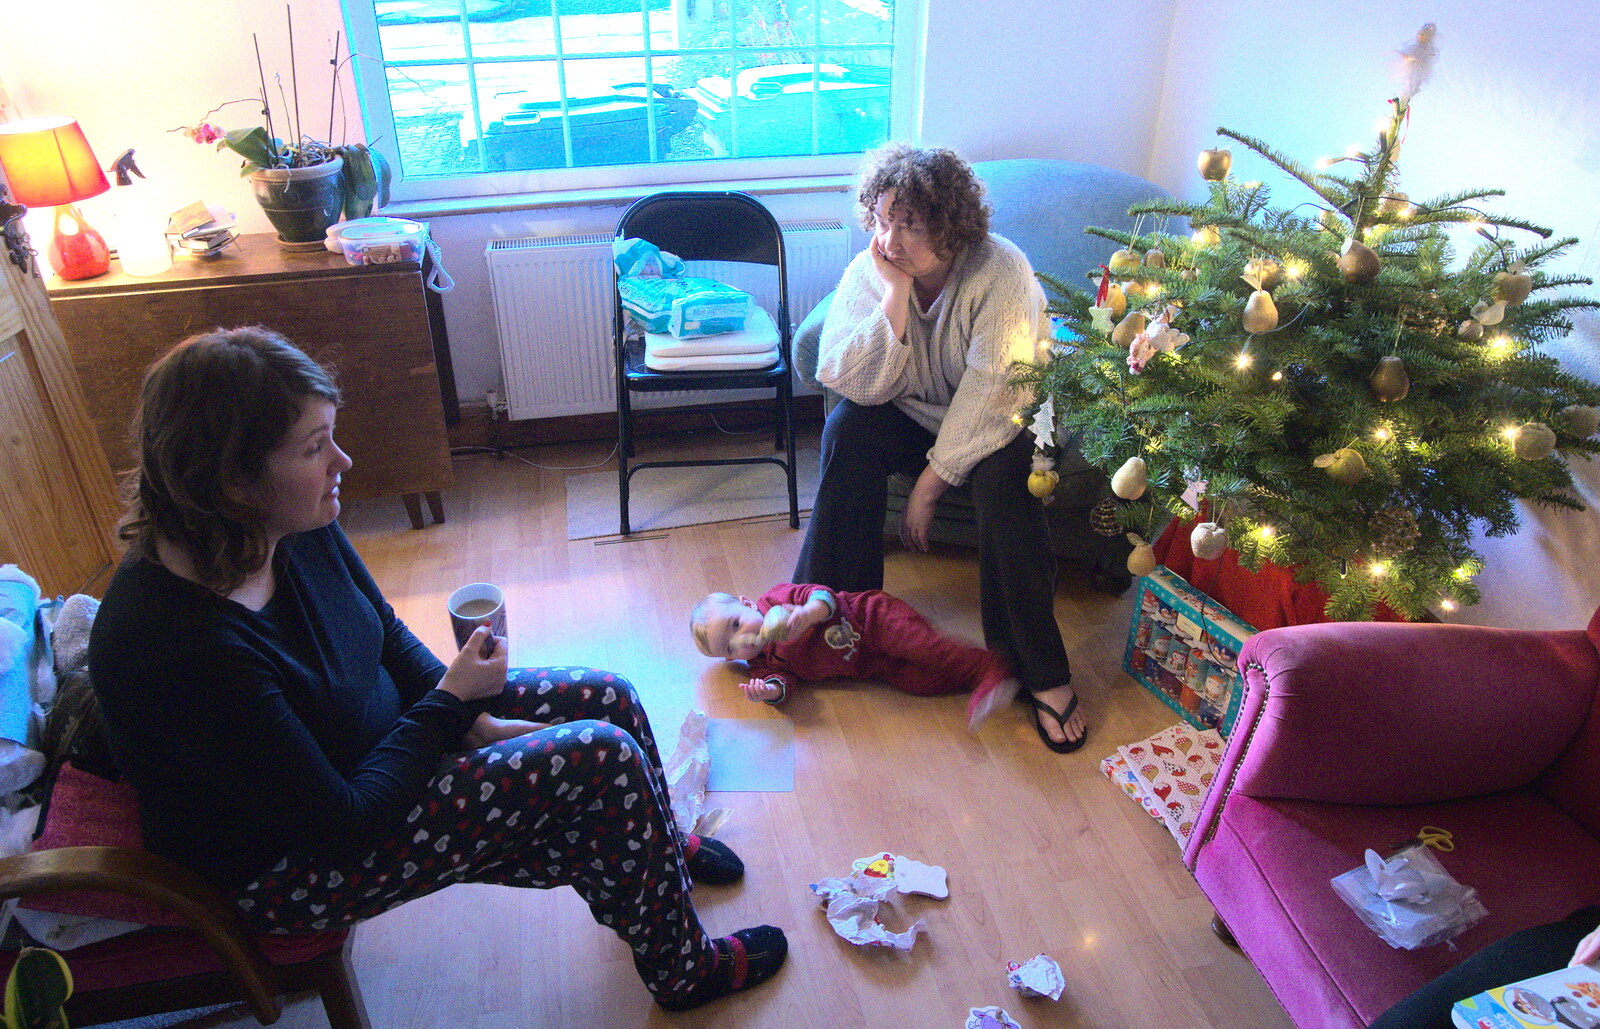 Isobel and Louise chat over coffee from A Pre-Christmas Dinner, Monkstown, Dublin - 16th December 2012